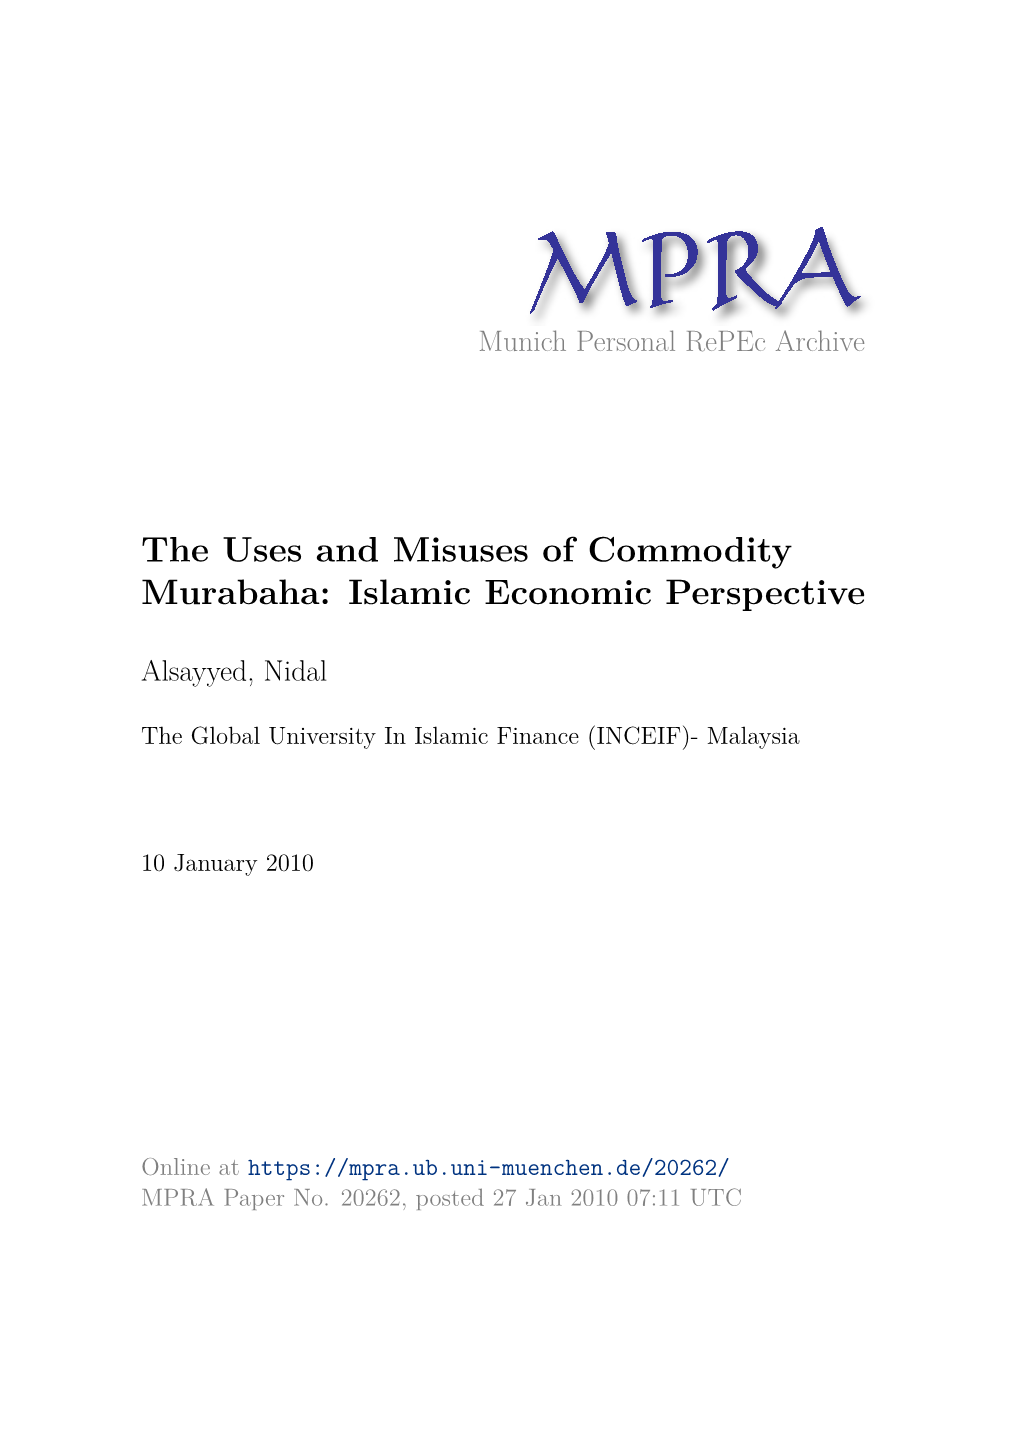 The Uses and Misuses of Commodity Murabaha: Islamic Economic Perspective